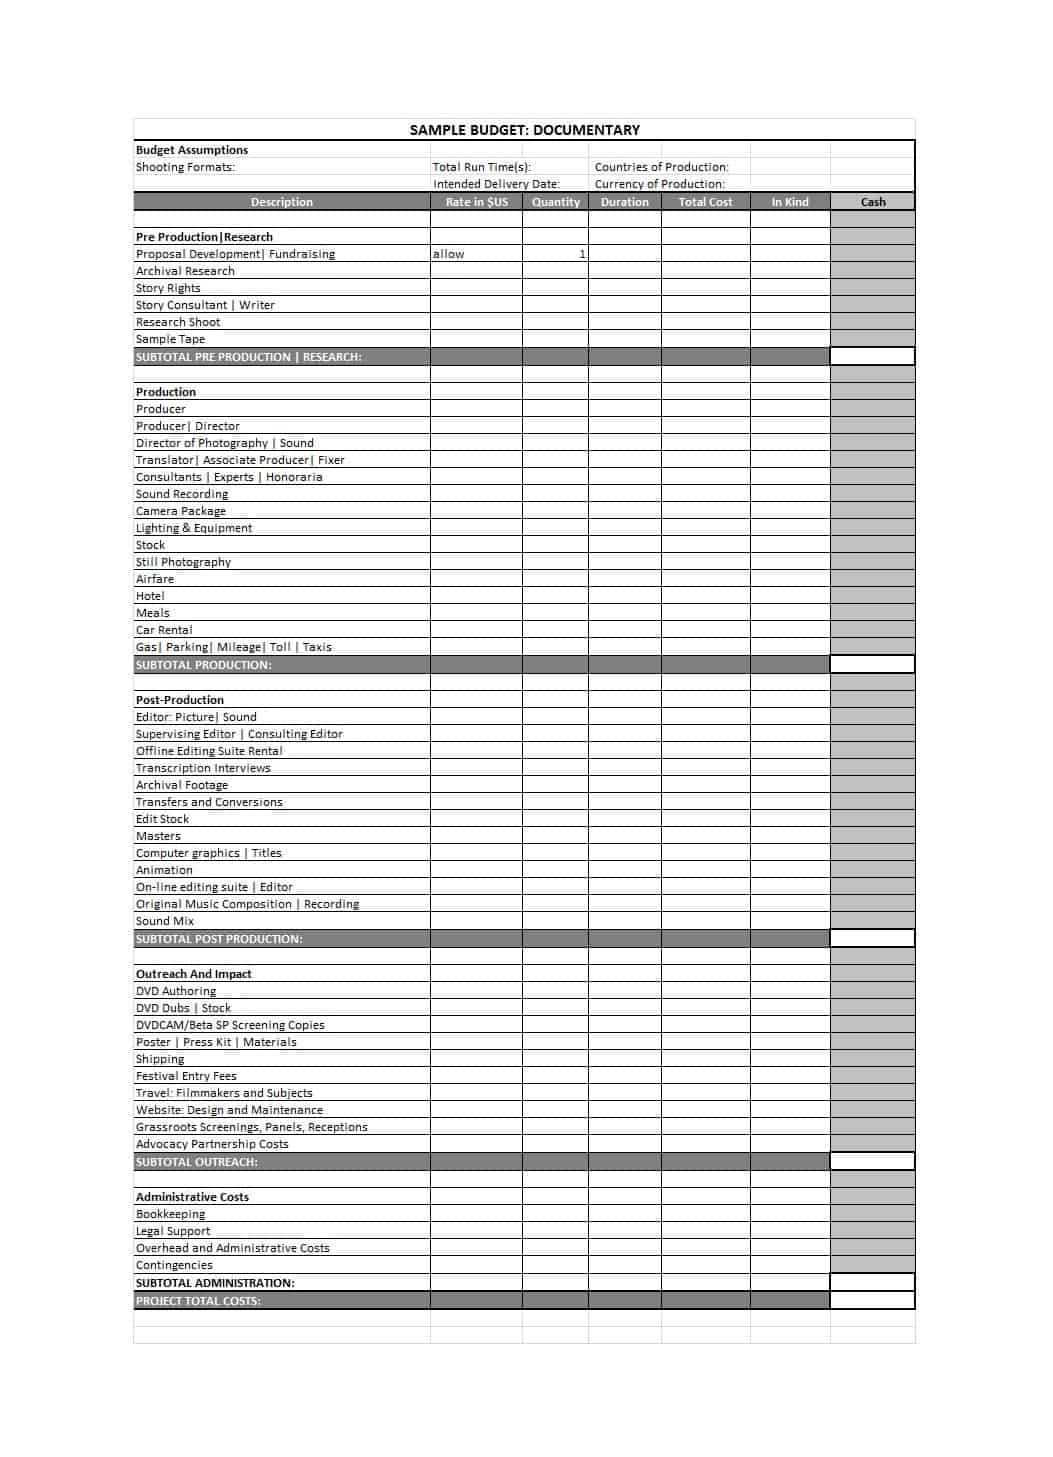 33 Free Film Budget Templates (Excel, Word) ᐅ Templatelab Inside Sound Report Template